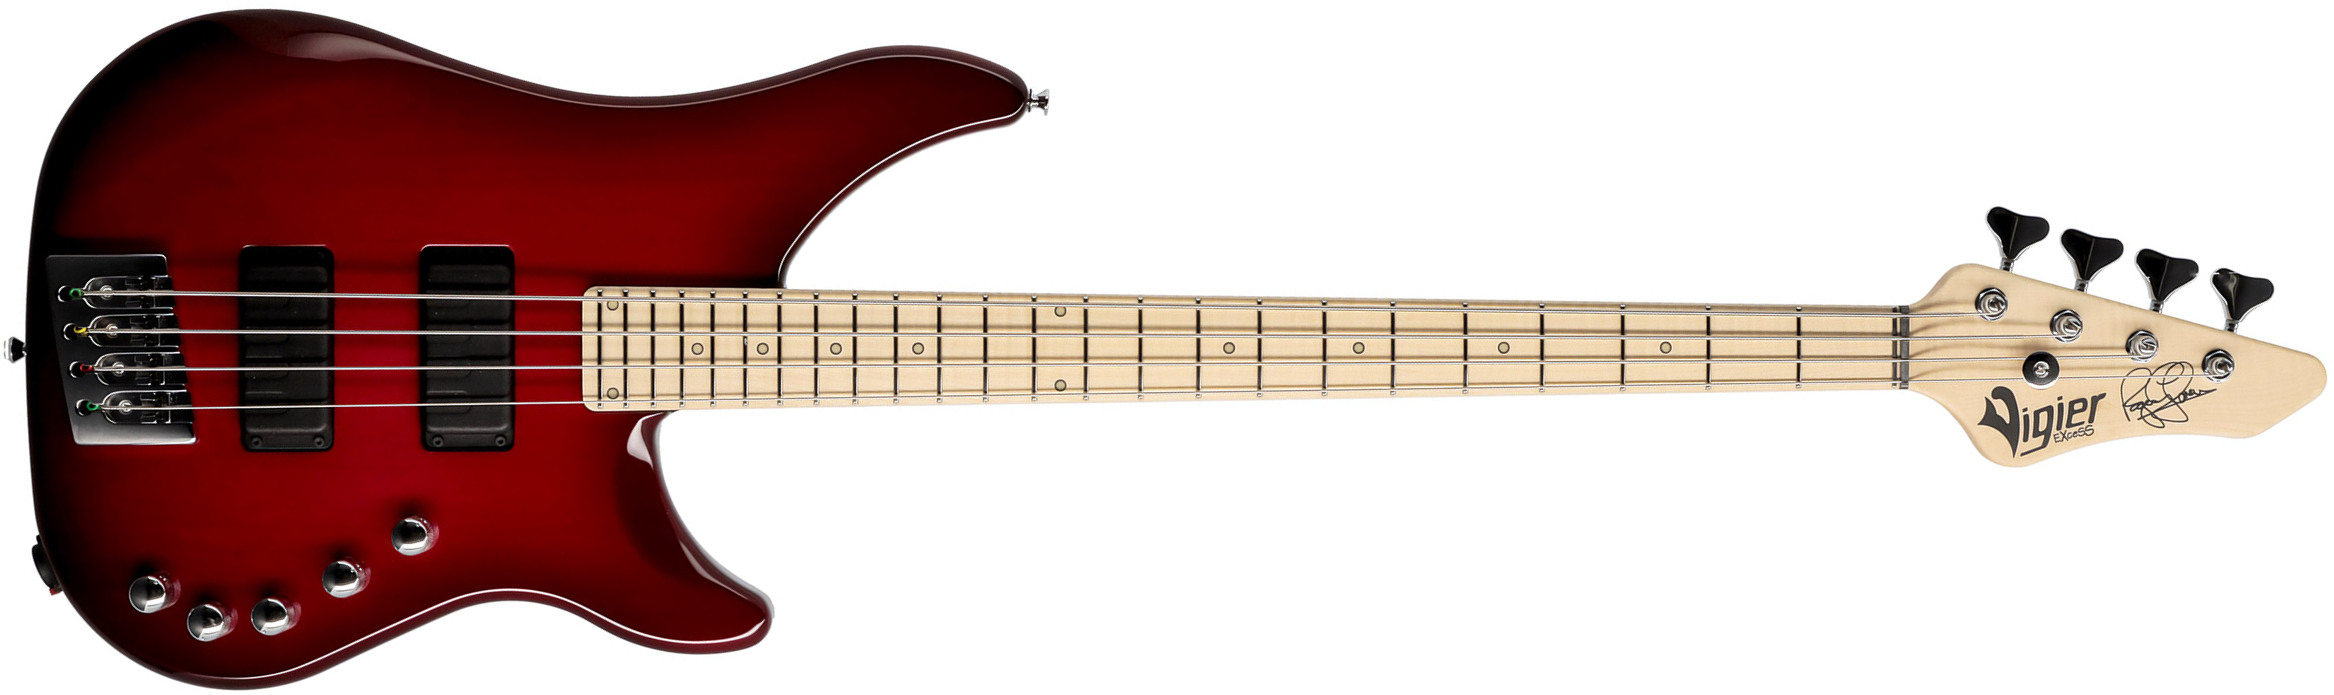 Vigier Roger Glover Excess Original Signature Active Mn - Clear Red - Solidbody E-bass - Main picture